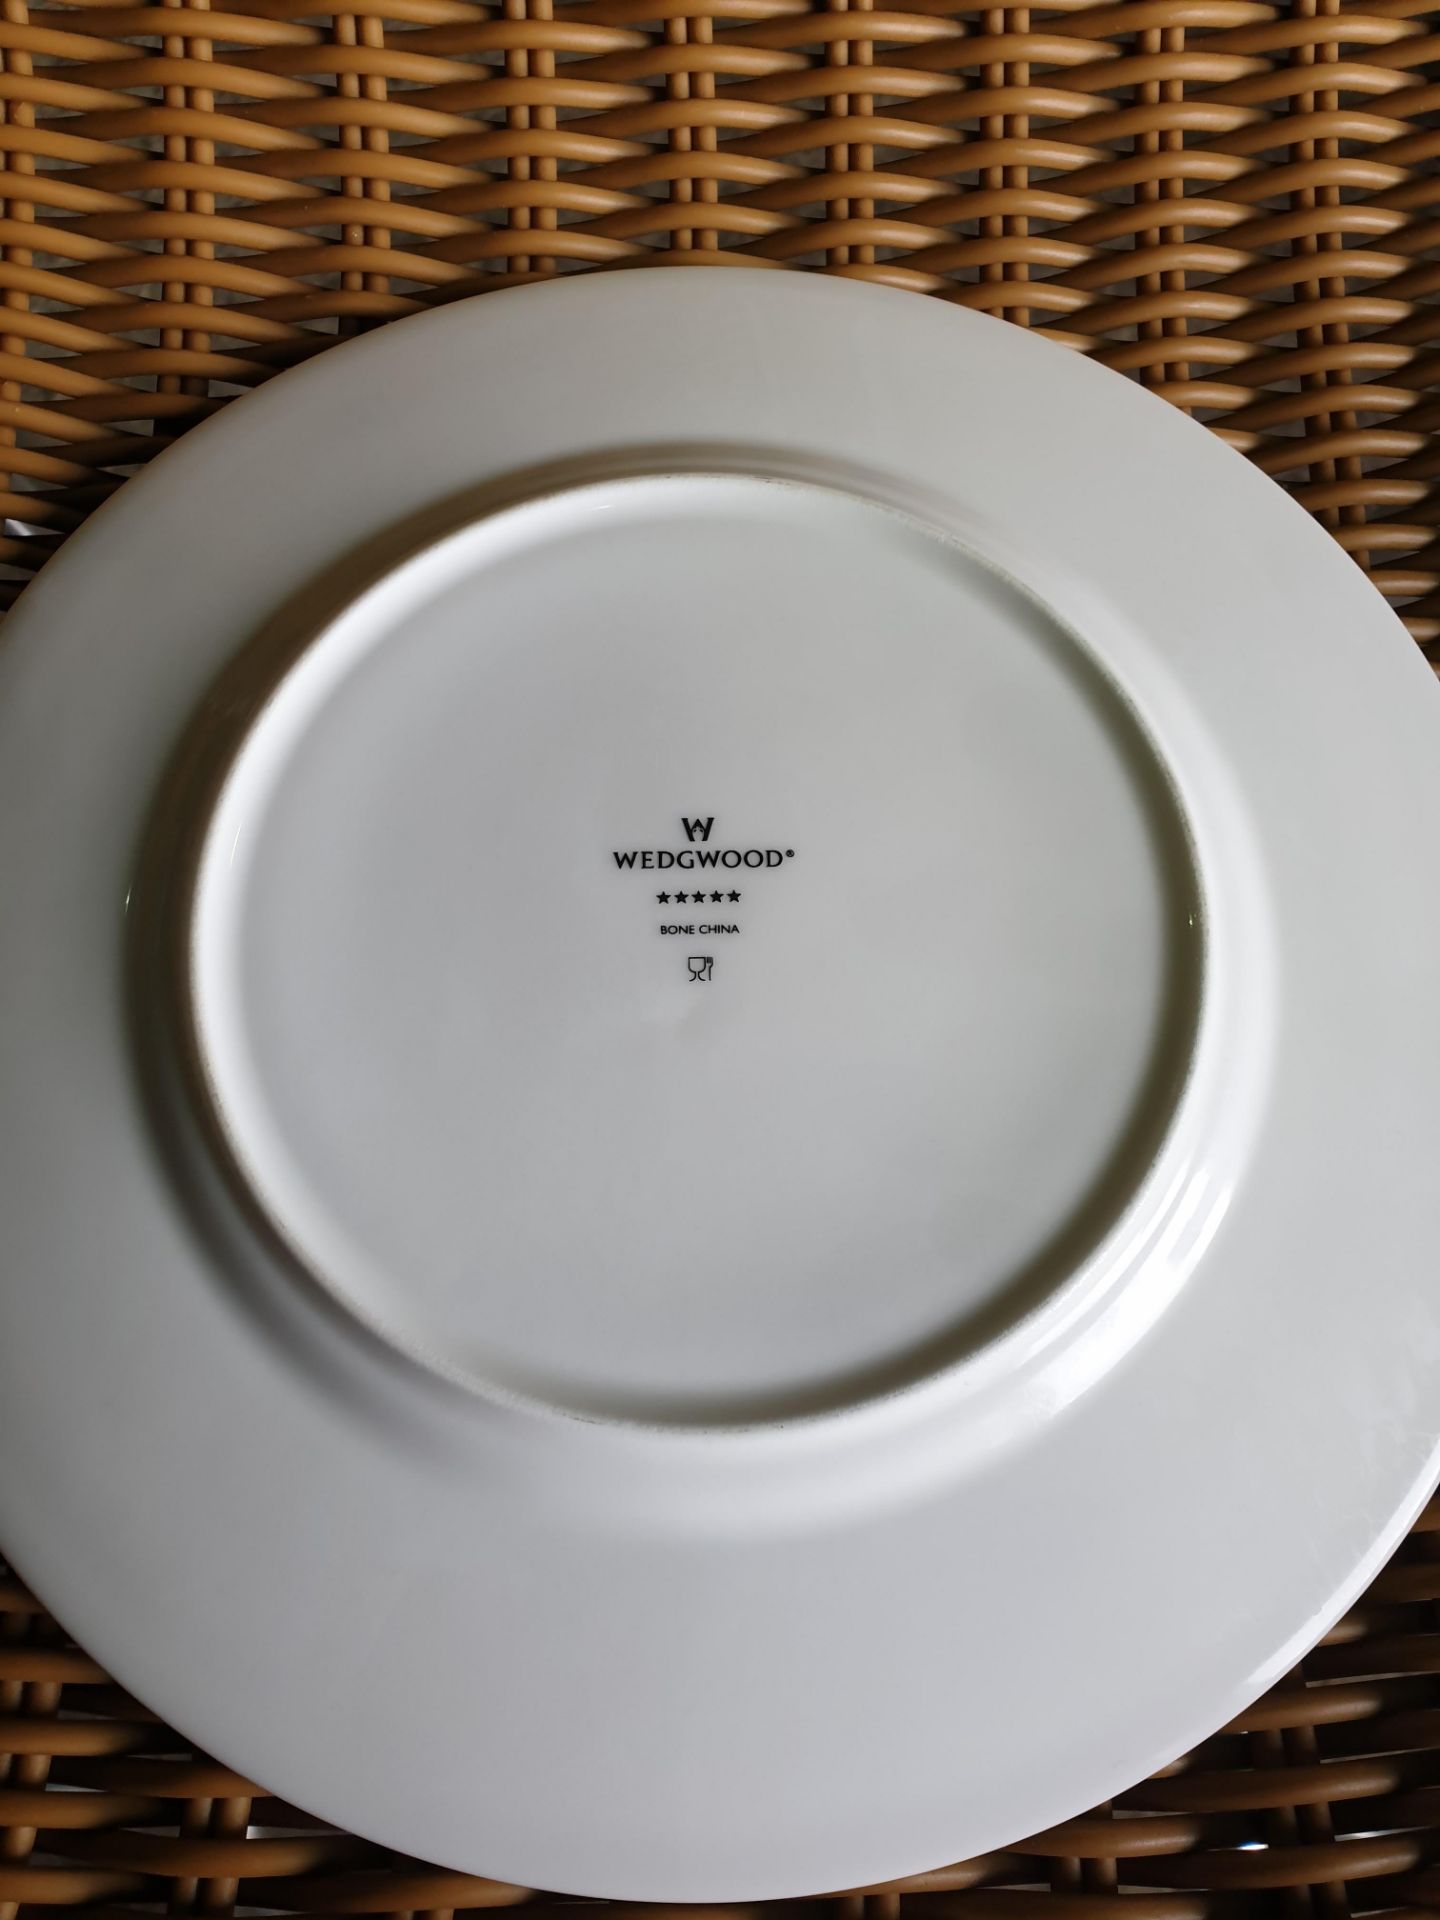 * 8inch Wedgewood Plate - Image 2 of 2